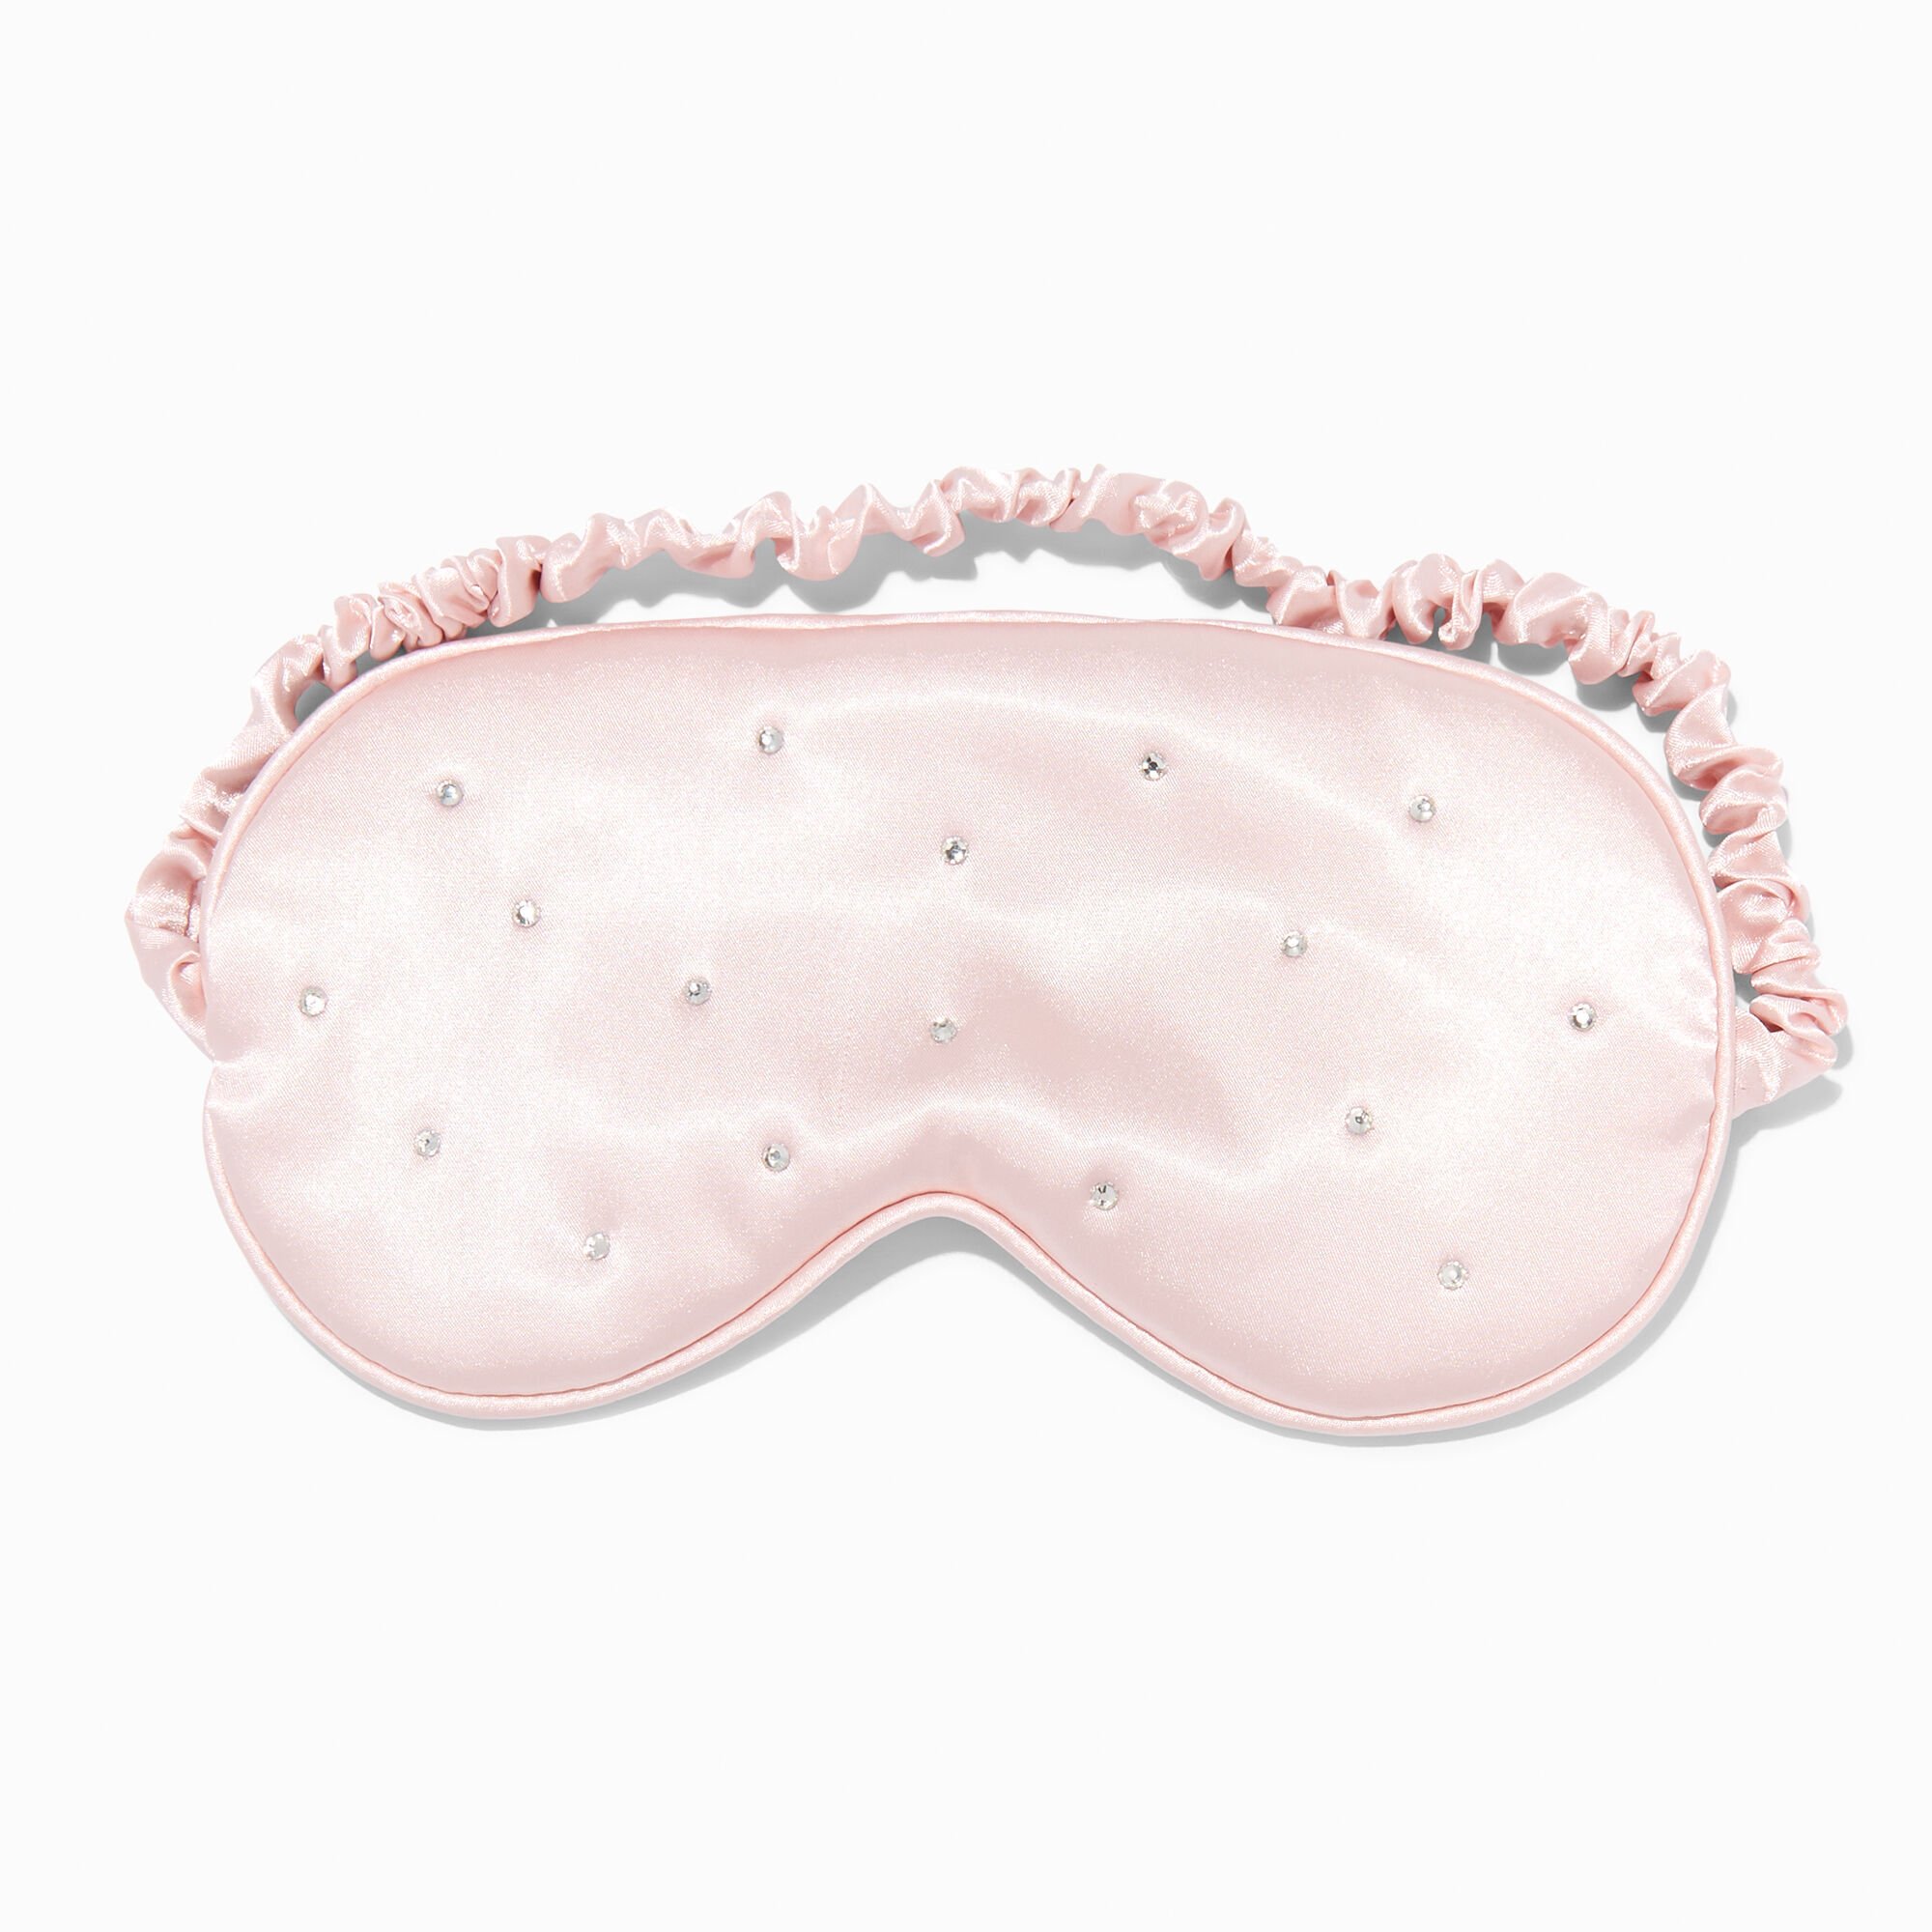 View Claires Bling Satin Sleeping Mask Pink information